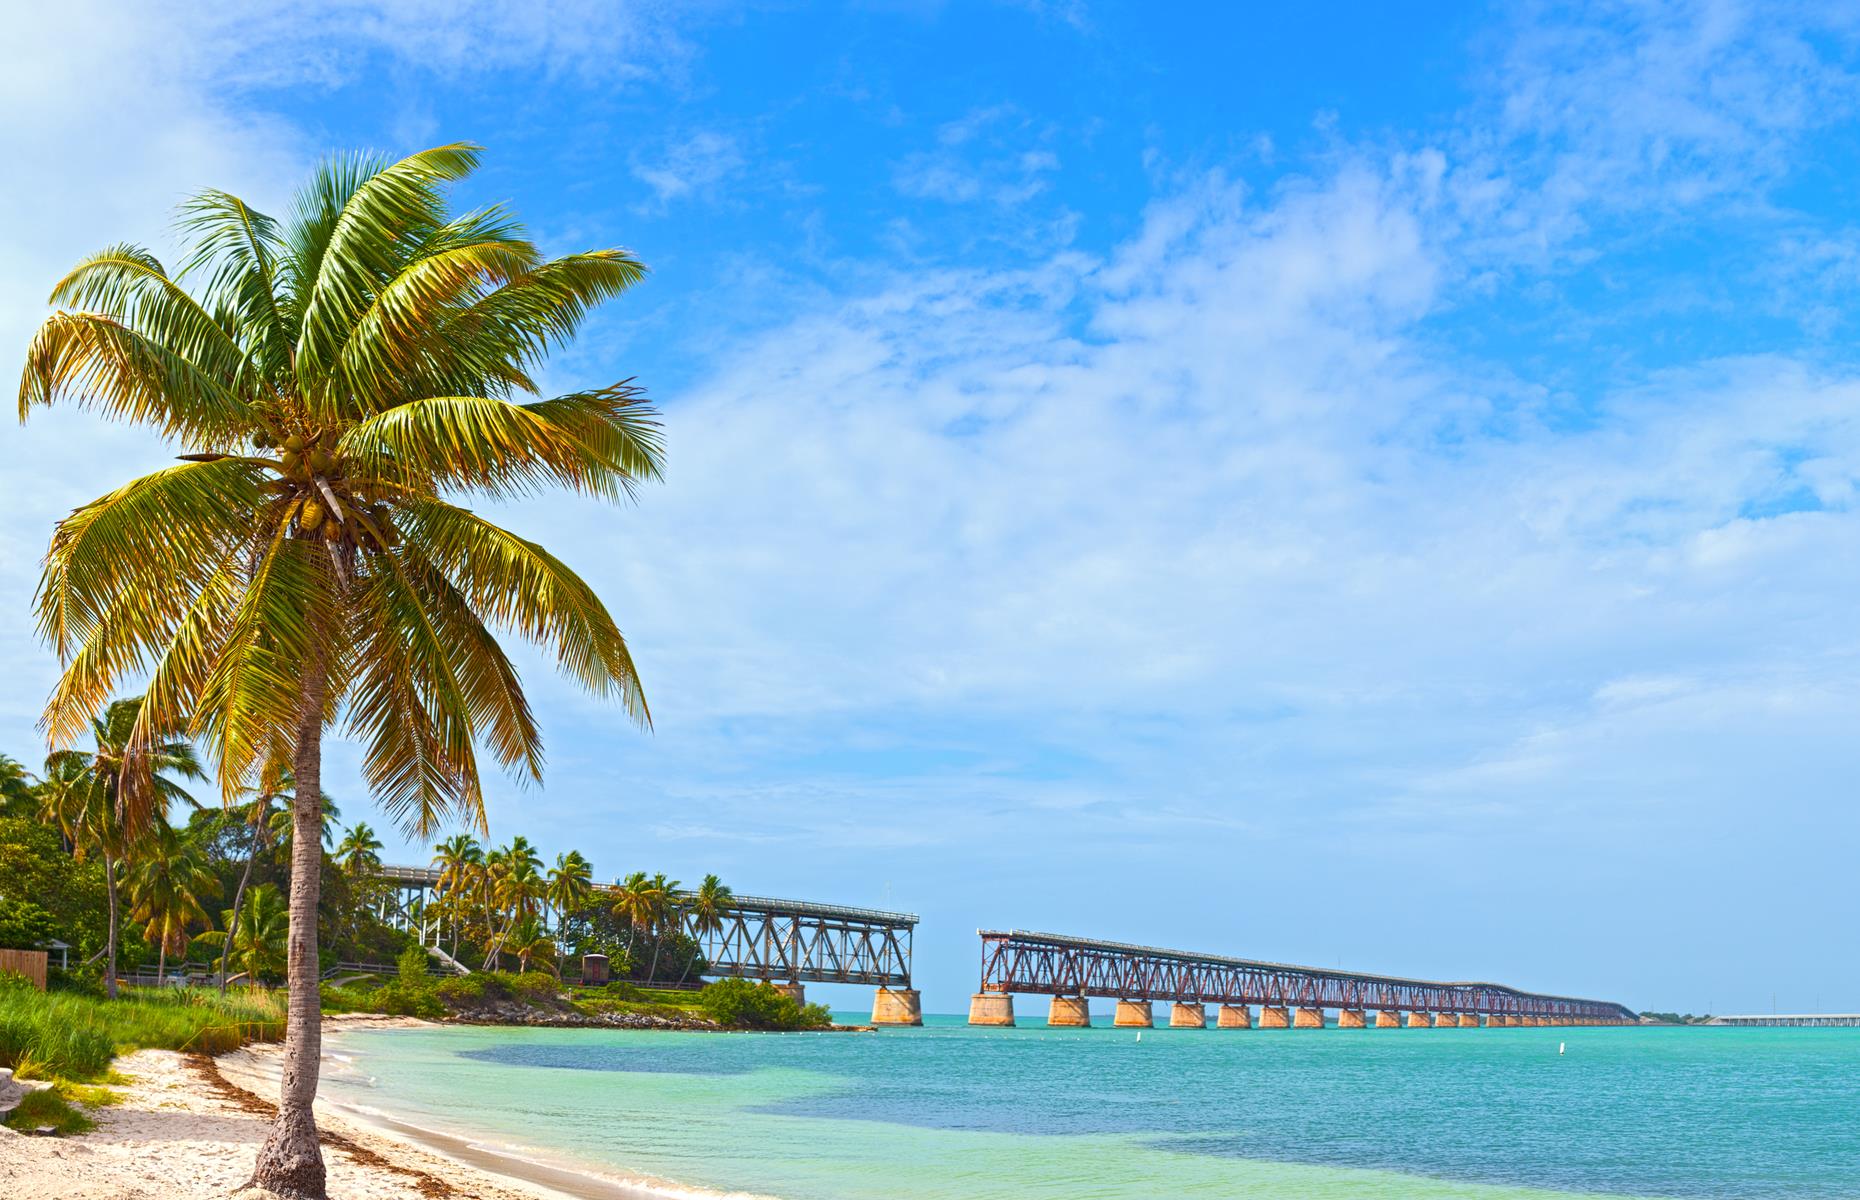 <p>Sites fill fast at this idyllic state park in the <a href="https://www.loveexploring.com/guides/73827/explore-the-florida-keys-where-to-stay-what-to-eat-the-top-things-to-do">Florida Keys</a>, and some campgrounds have been closed (<a href="https://www.floridastateparks.org/BahiaHonda">the website has up-to-date information</a>). With ghostly pale beaches, spindly palm trees and an endless expanse of blue, it’s paradise. Those who don’t nab an overnight spot should still plan to spend a few hours here, if day access is open. There are usually plenty of places to park right by the sand and enjoy views of old Bahia Honda State Bridge, a remnant of Henry Flagler’s Overseas Railroad.</p>